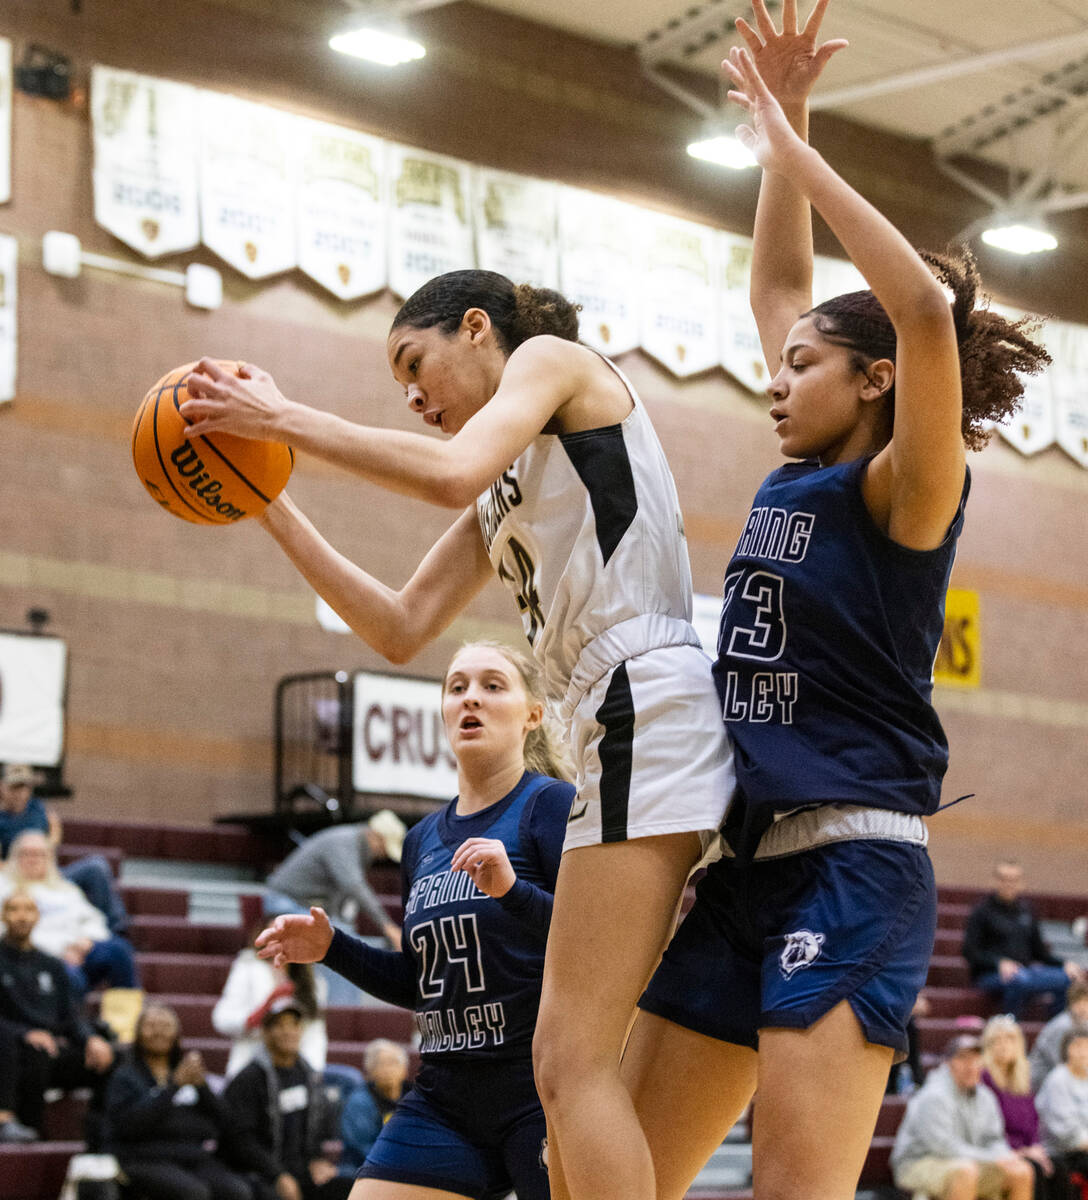 Faith Lutheran's Leah Mitchell (34) goes for the rebound as Spring Valley's high Delaney Bartle ...